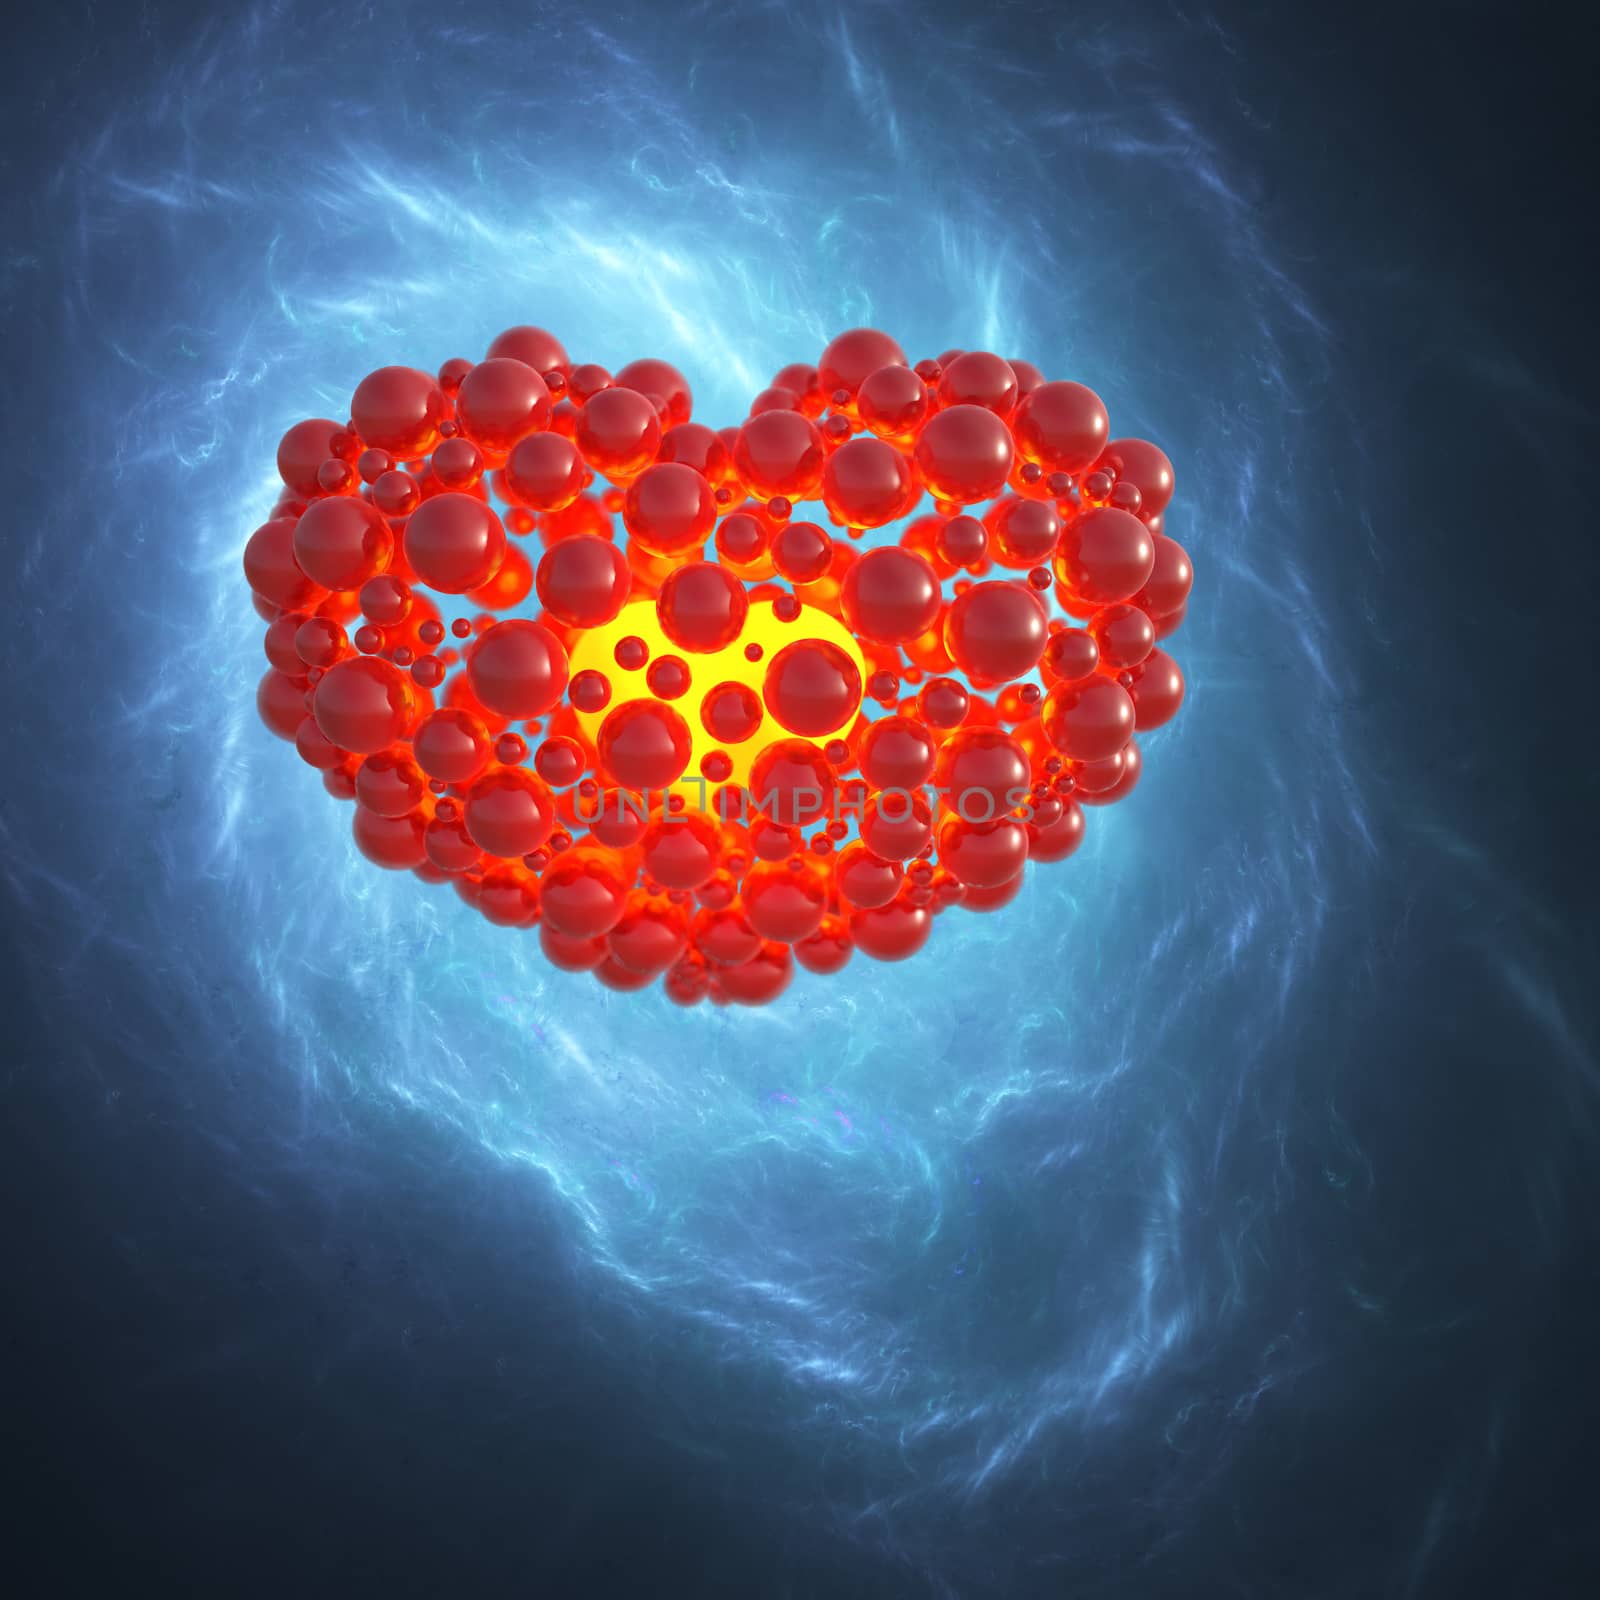 Red heart made of spheres with reflections isolated on blue galaxy space background. Happy valentines day 3d illustration by skrotov